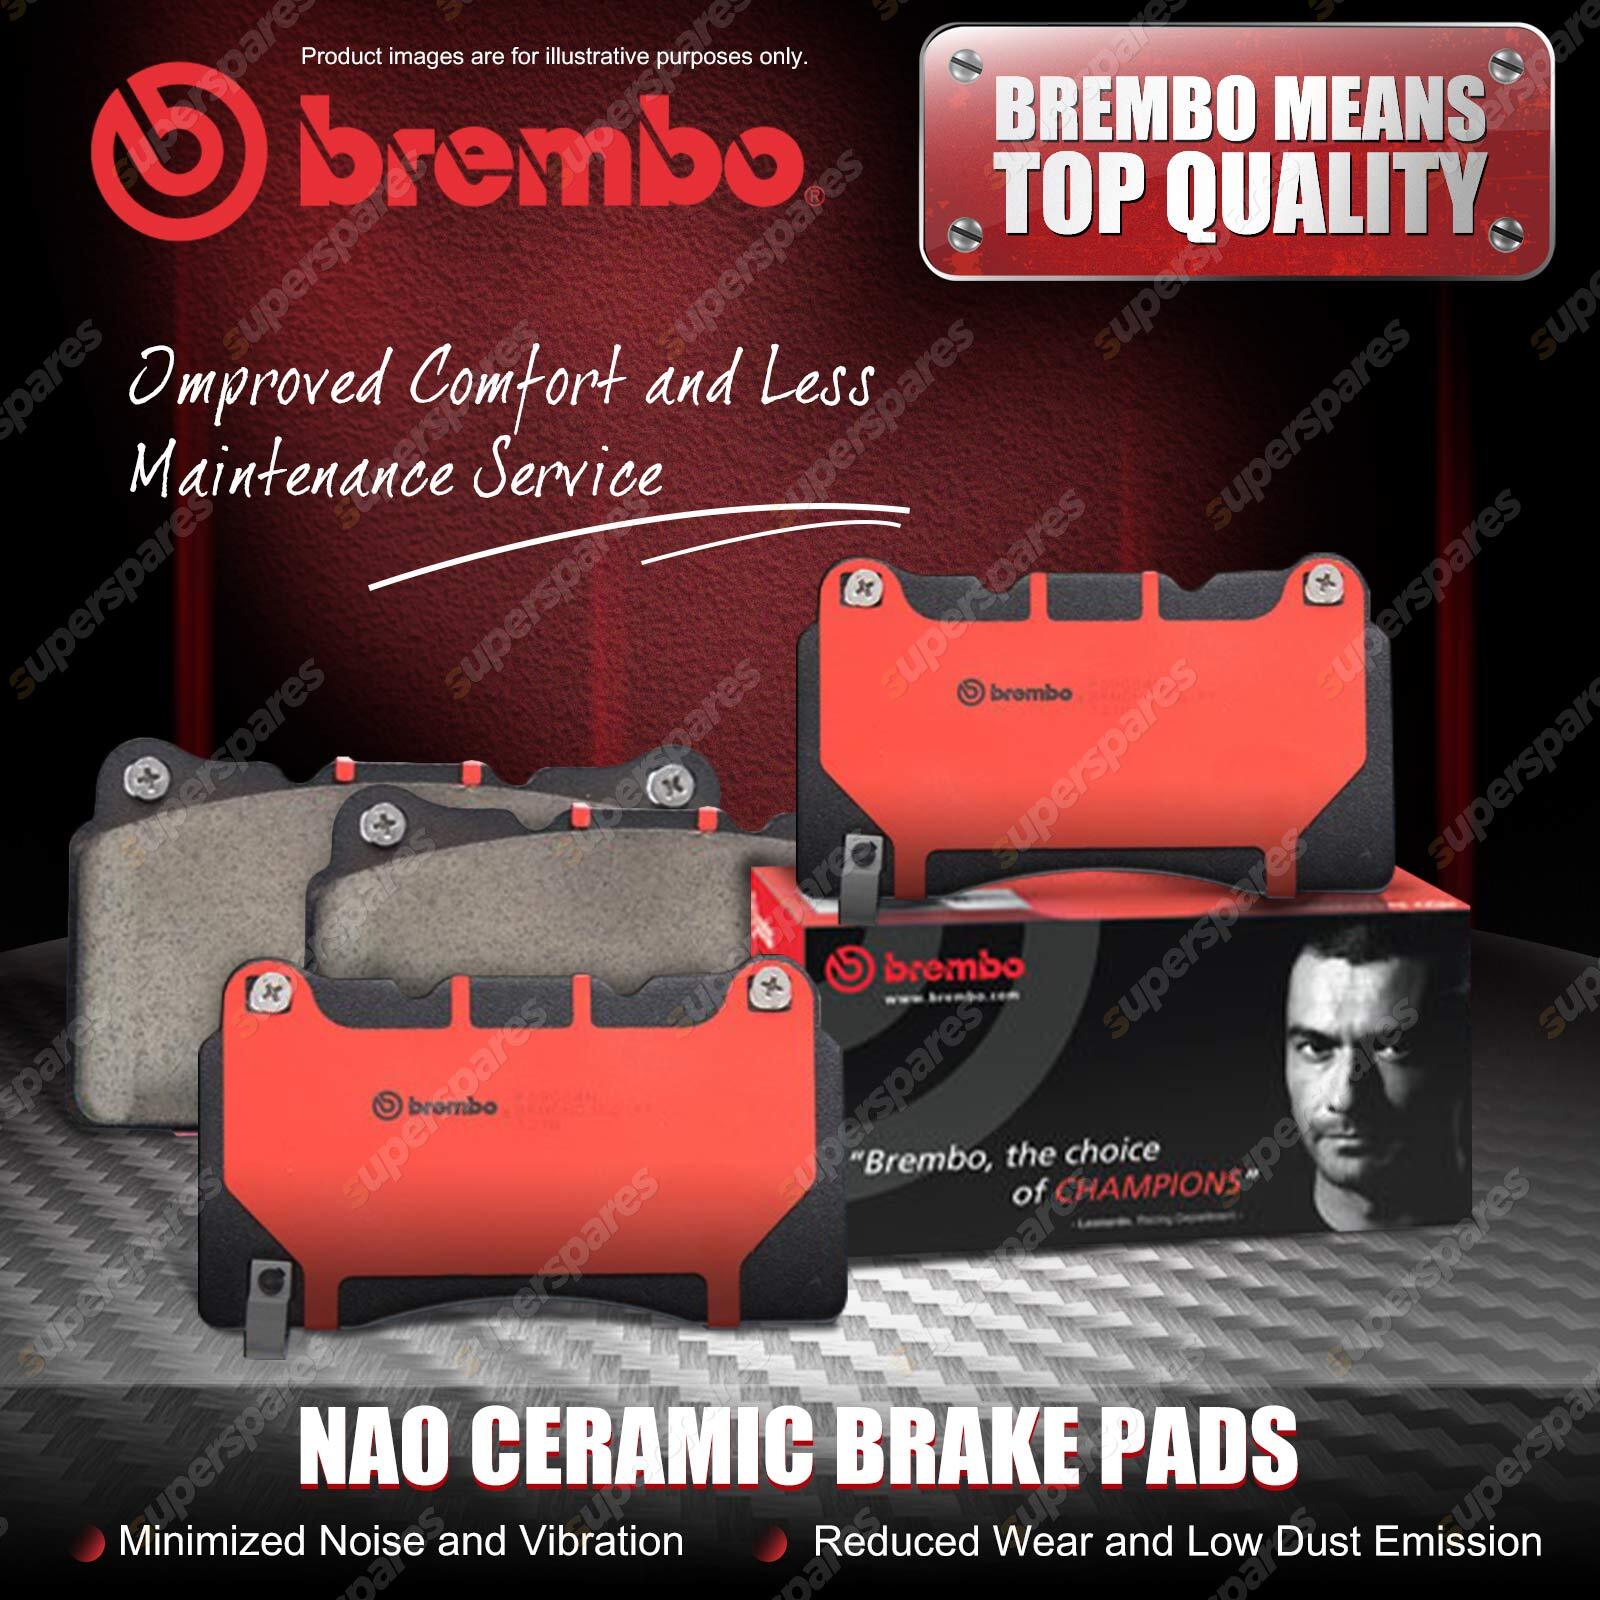 https://www.superspares.com.au/assets/full/Brembo-PadNAO-C2103-T0505.jpg?20210424015207